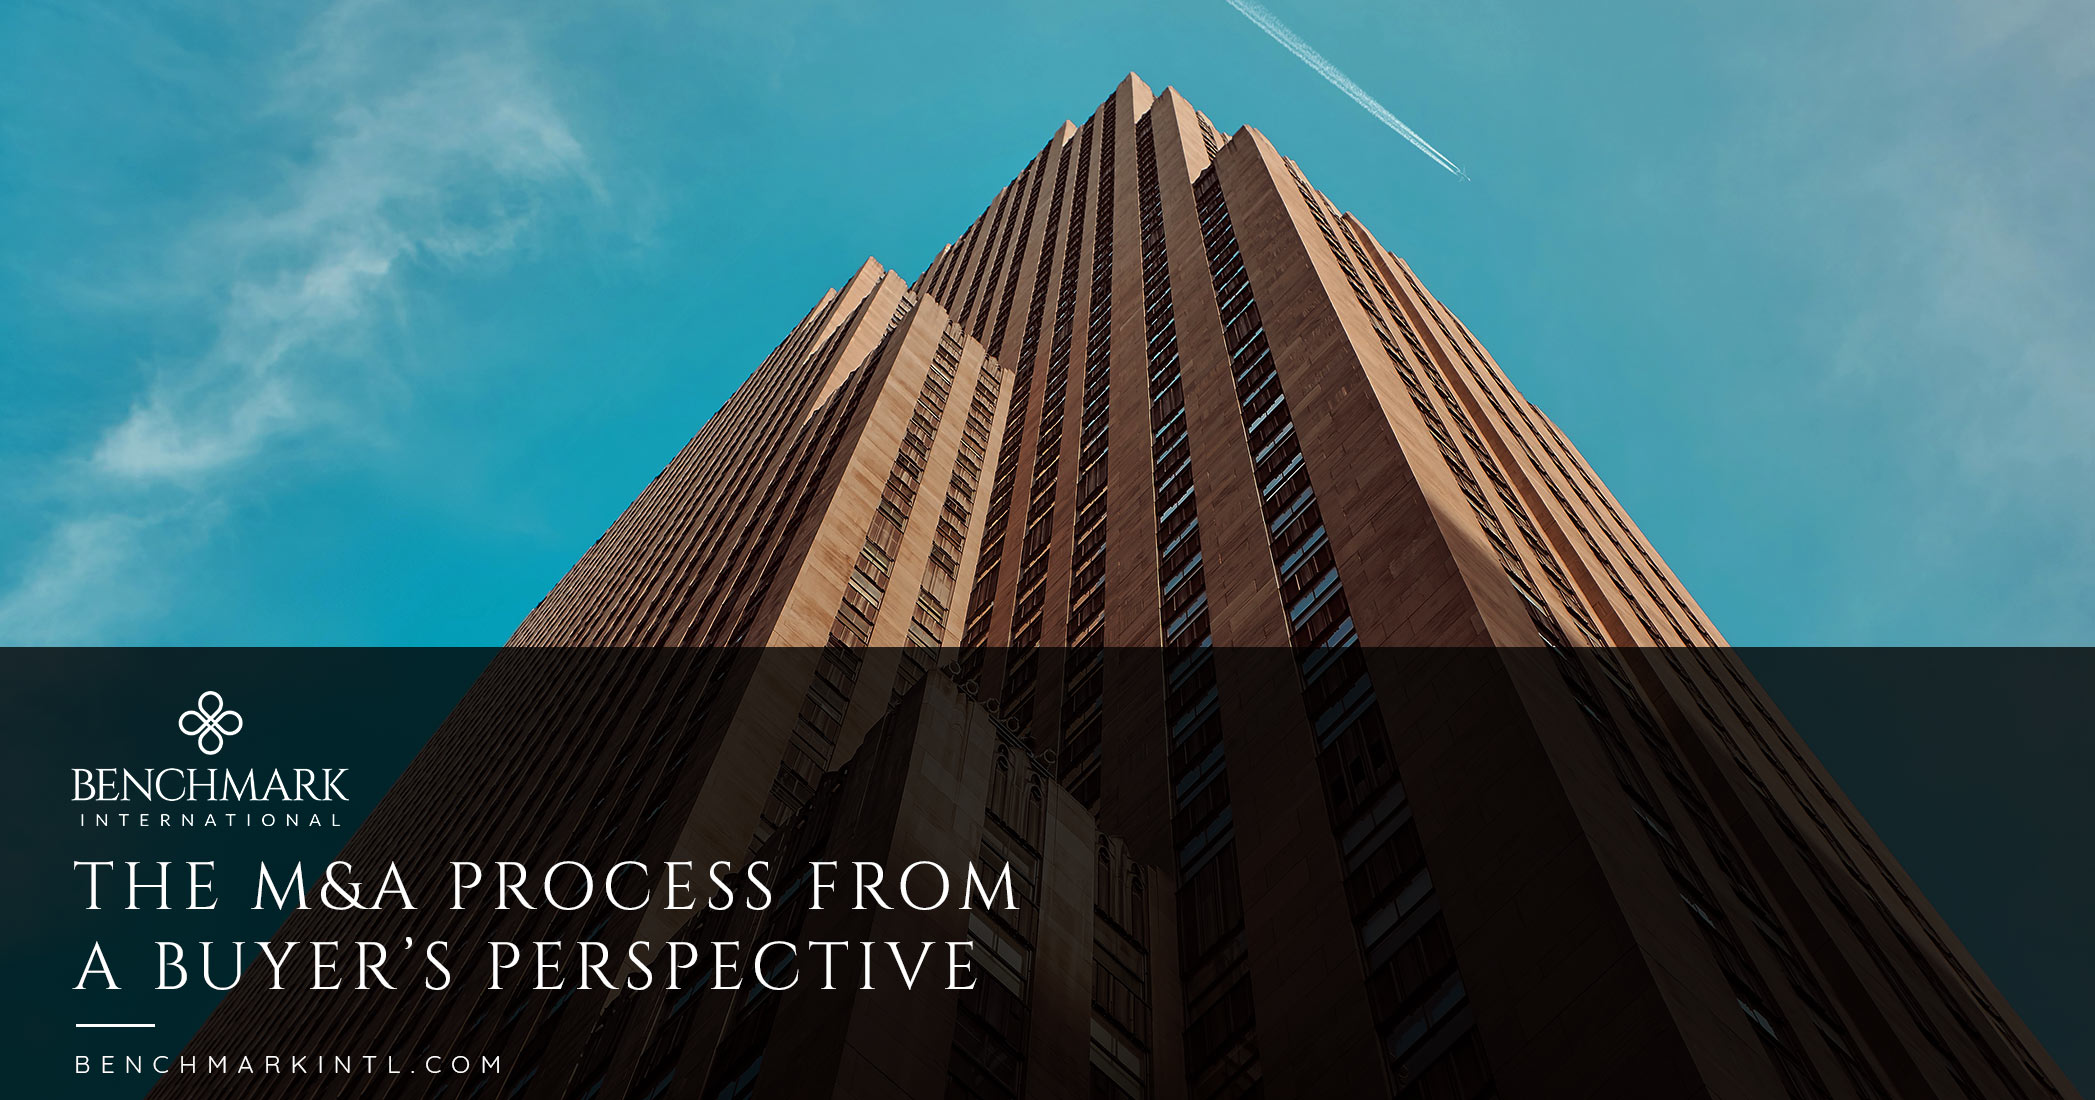 The M&A Process From A Buyer’s Perspective